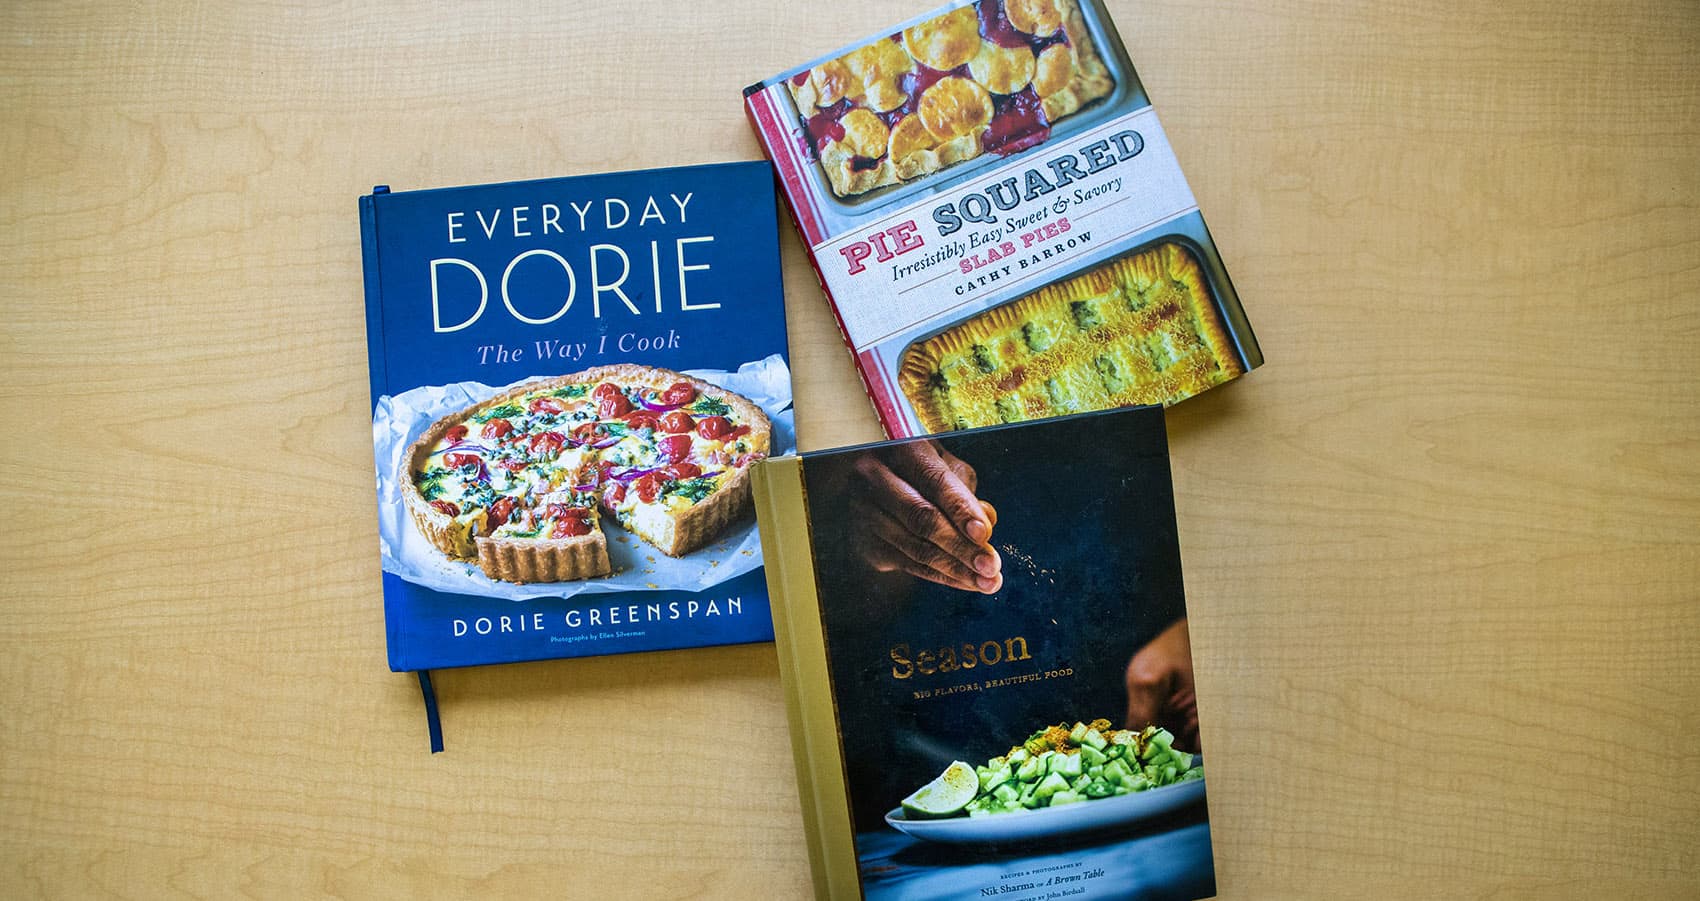 Three of chef Kathy Gunst's favorite cookbooks of 2018: "Pie Squared: Irresistibly Easy Sweet & Savory Slab Pies," by Cathy Barrow; "Everyday Dorie: The Way I Cook," by Dorie Greenspan; "Season: Big Flavors, Beautiful Food," by Nik Sharma. (Jesse Costa/WBUR)